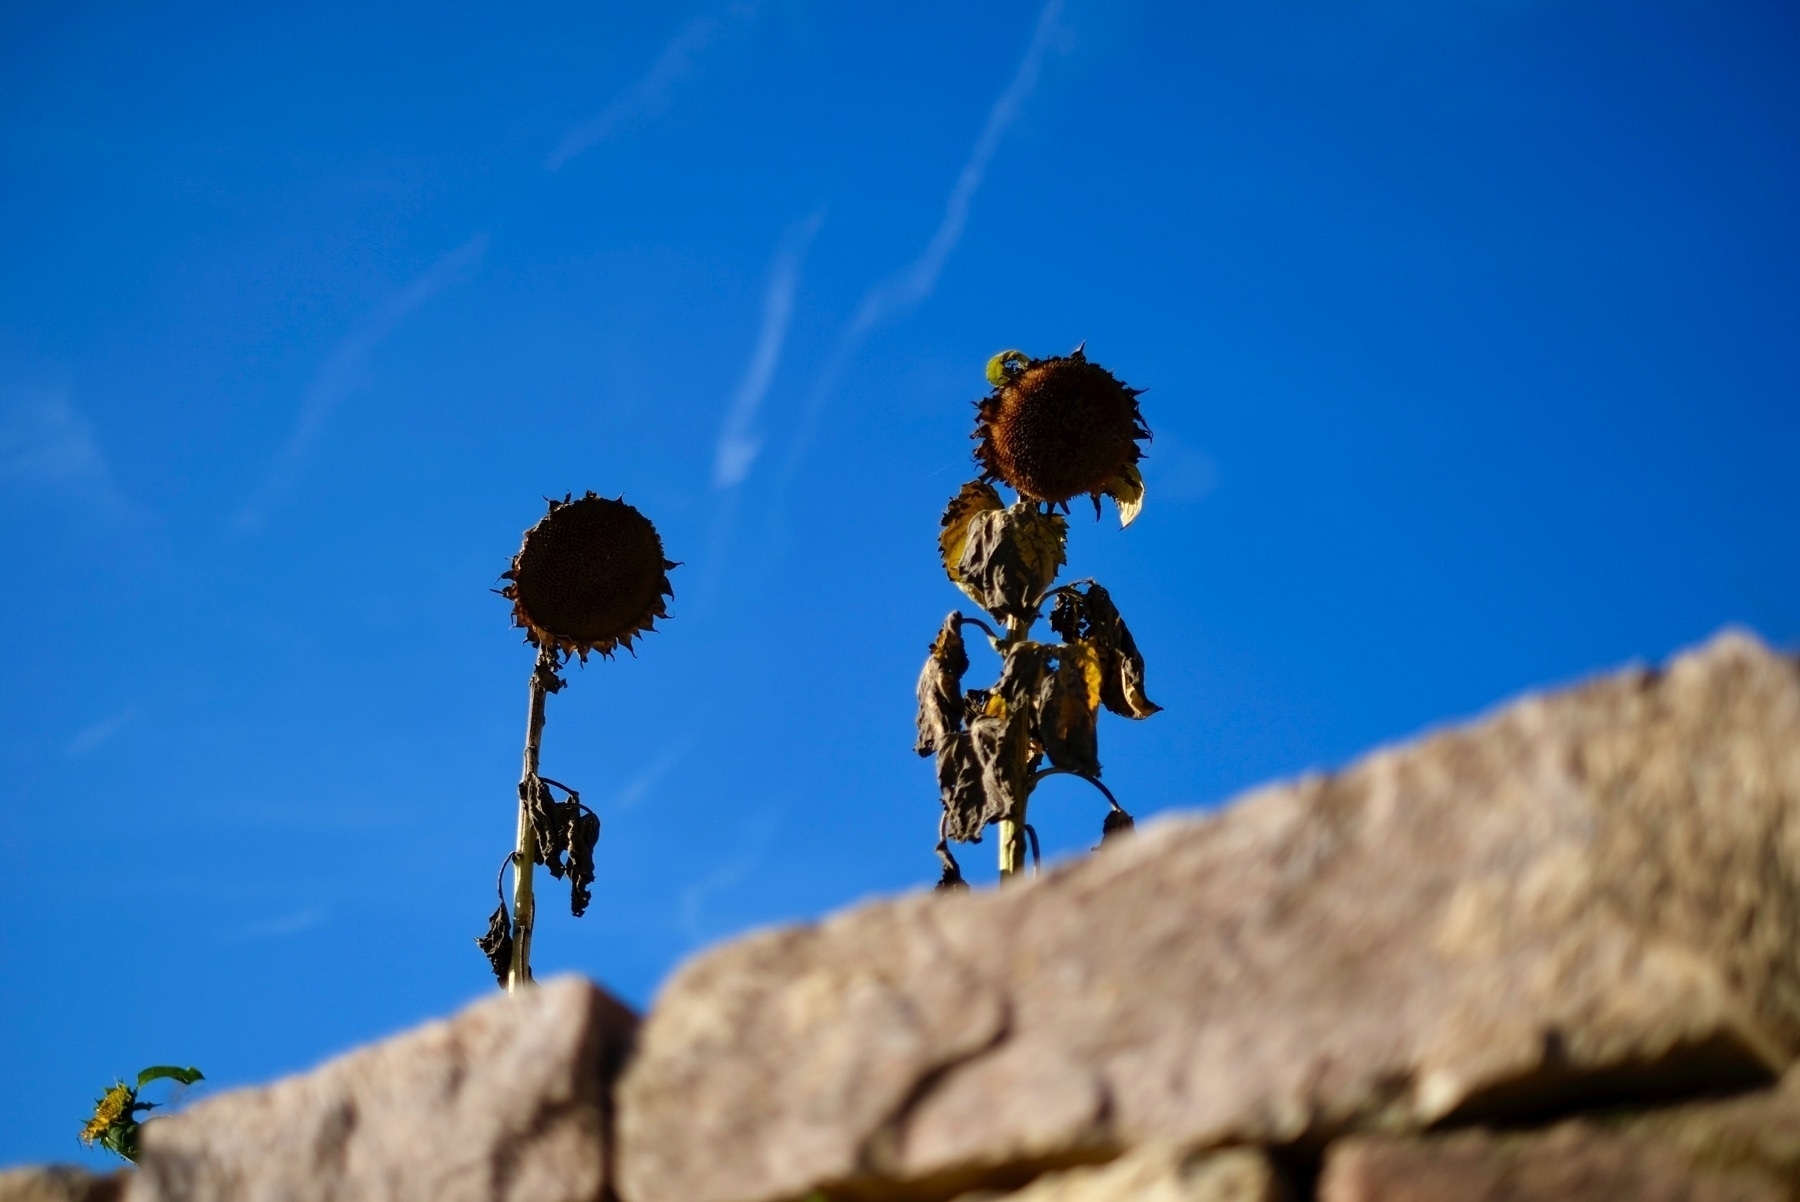 Withered sunflowers behind a stone wall and in front of the blue sky